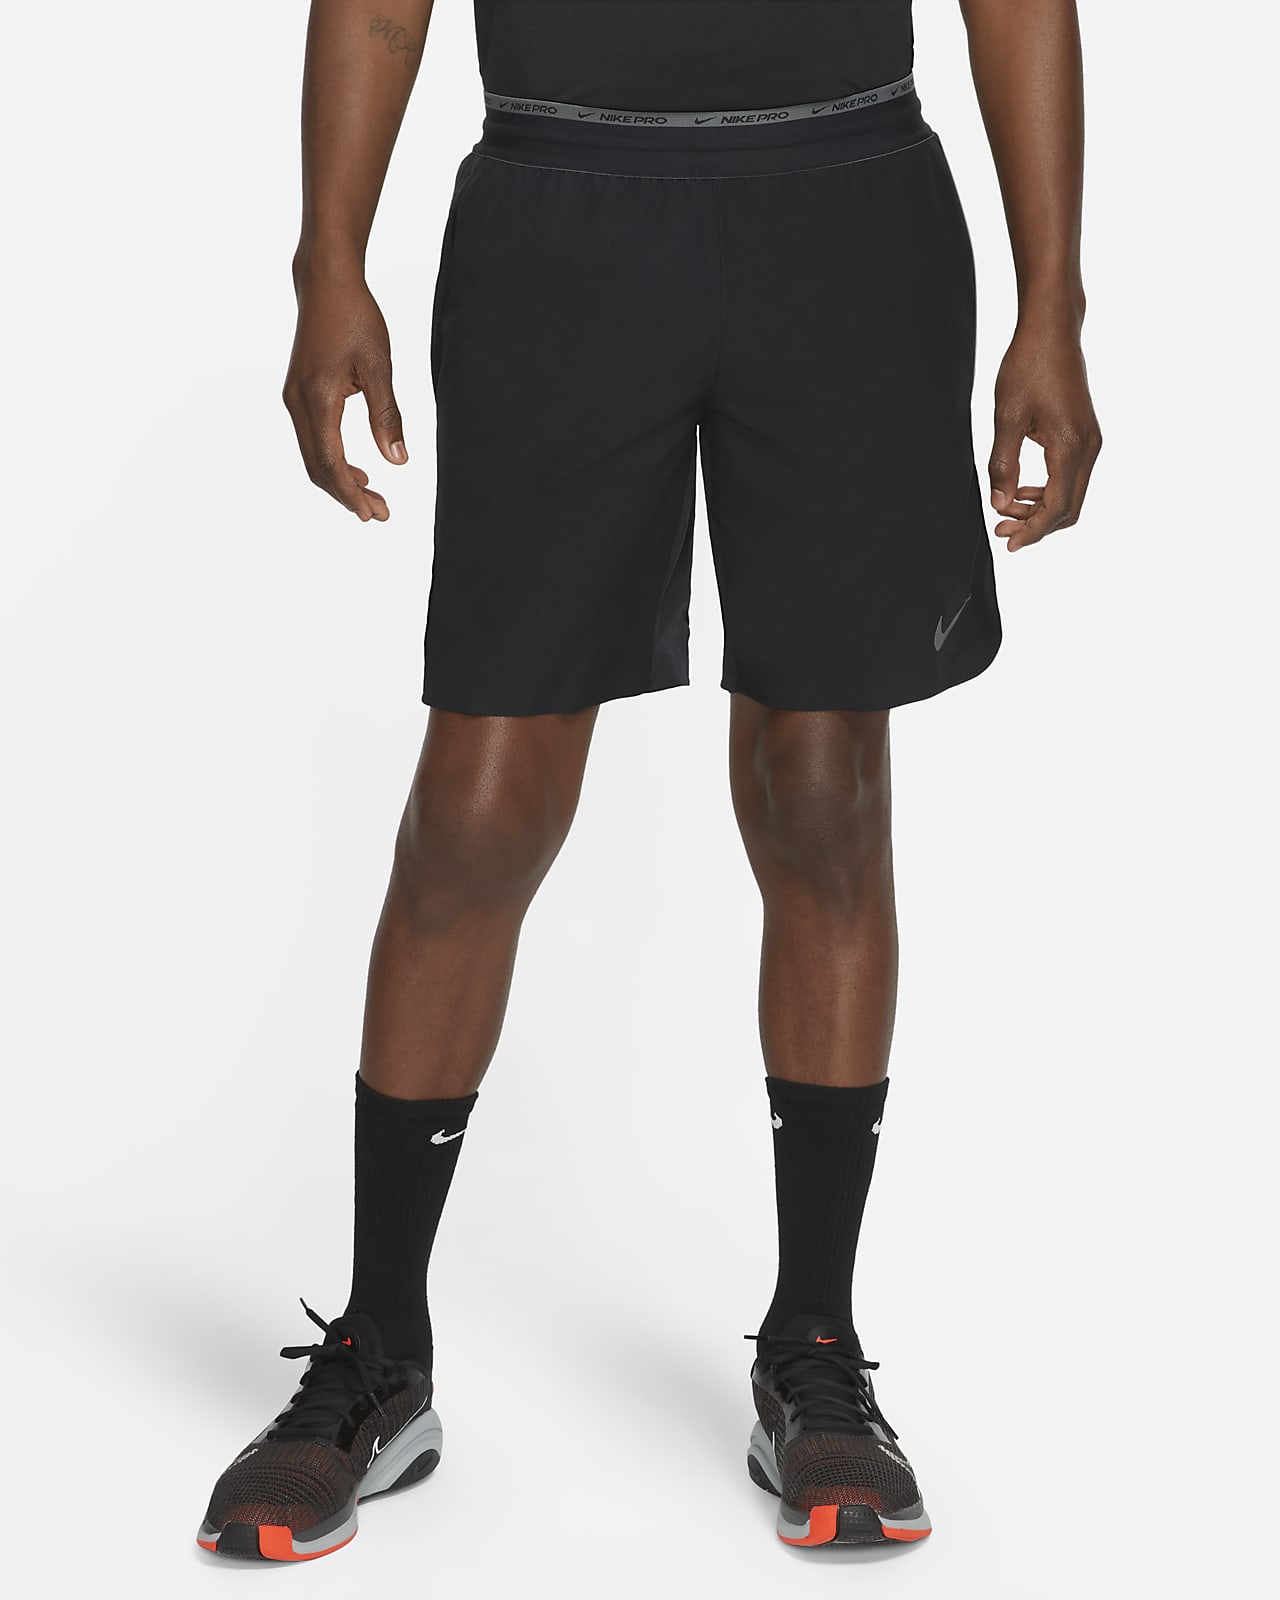 Nike Dri-FIT Flex Rep Pro Collection Men's 20cm (approx.) Unlined Training Shorts